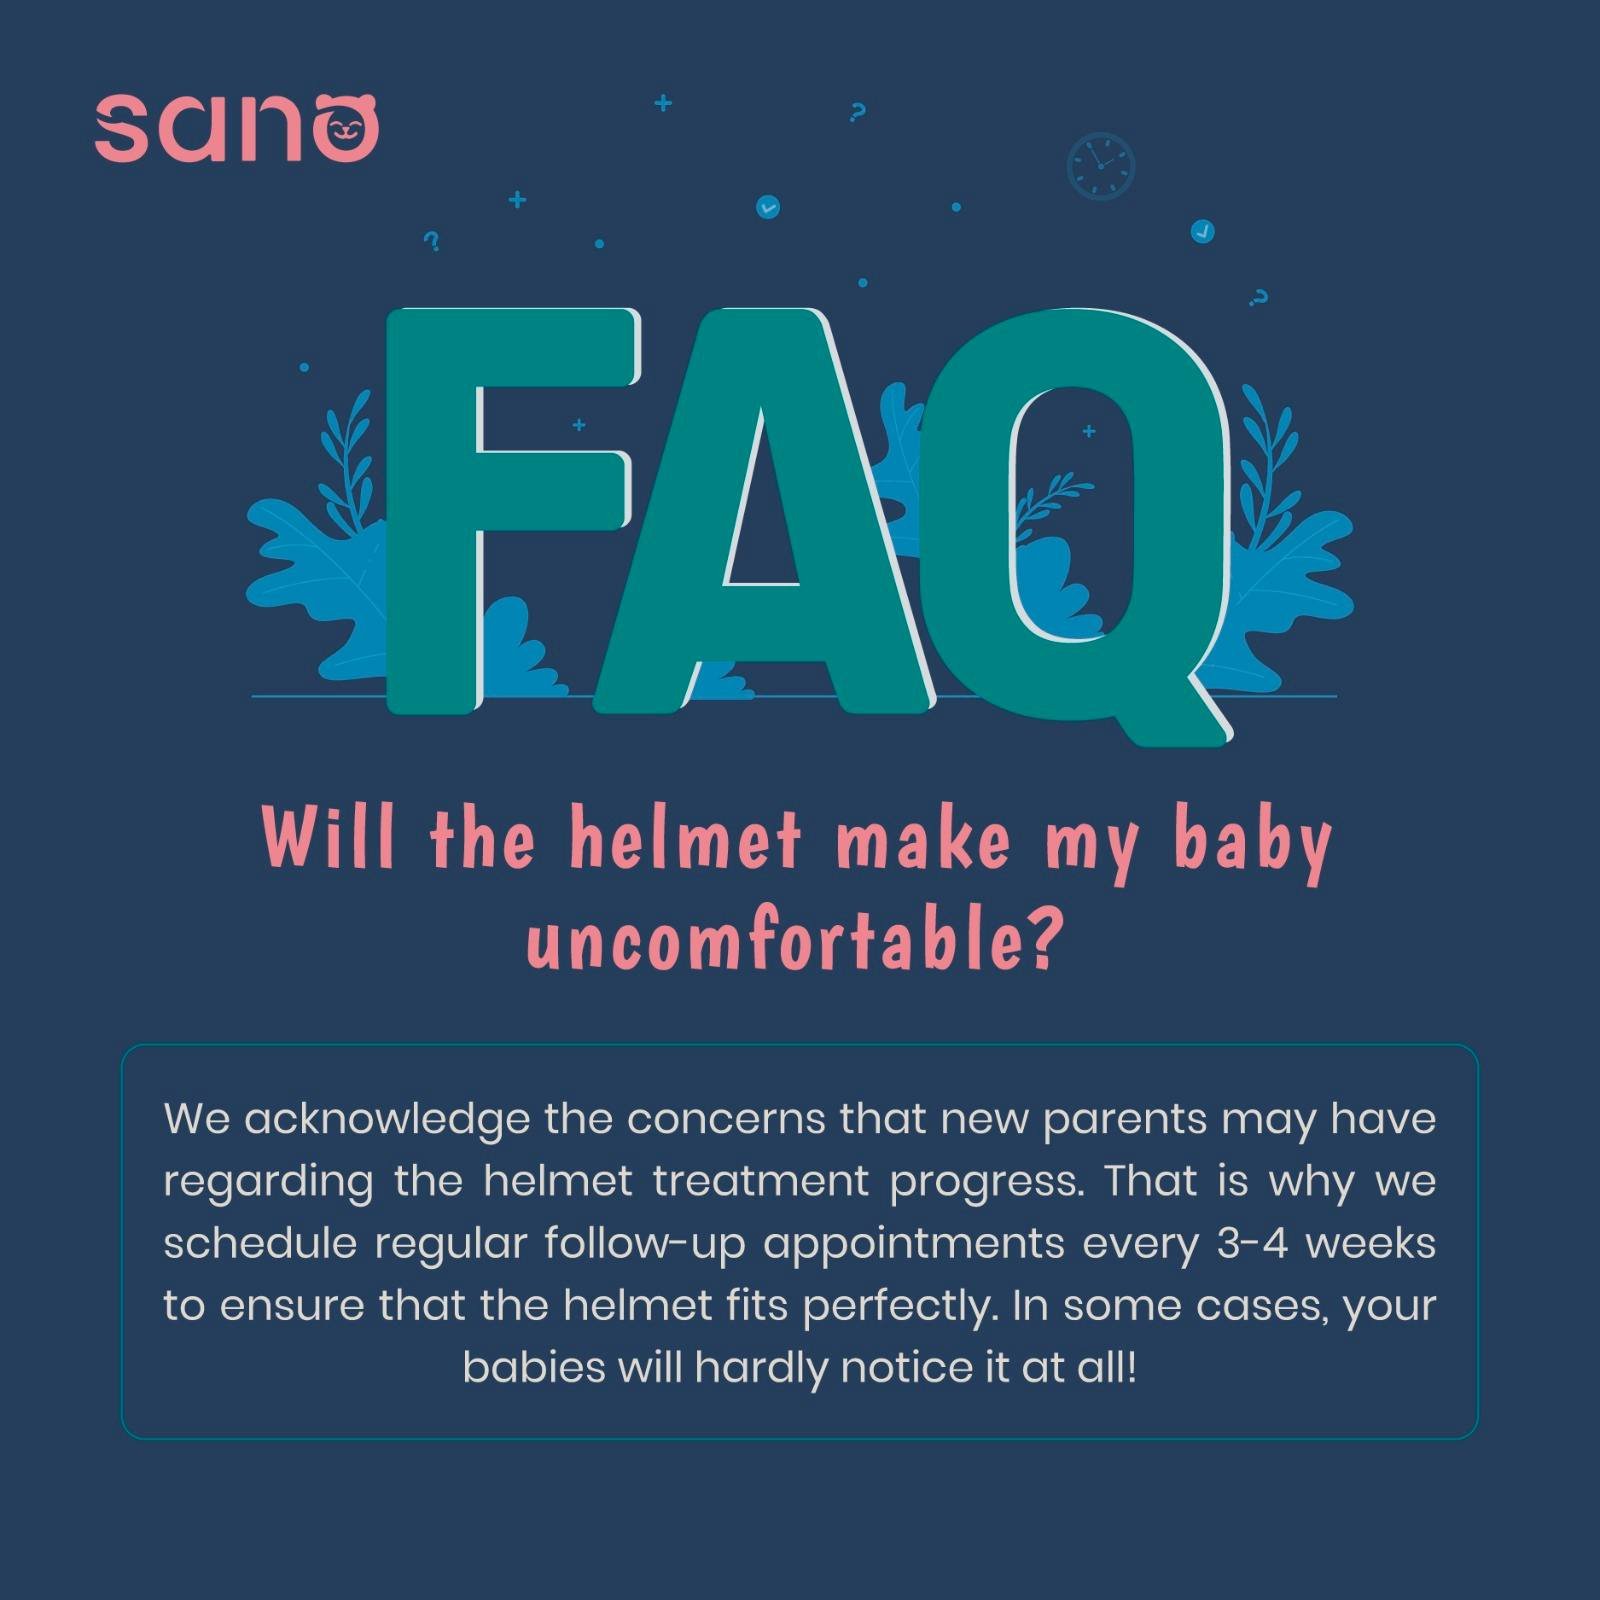 As a new parent, it might concern you to think about your baby wearing a helmet during their formative months. But rest assured, an optimally fitting helmet will be comfortable for your baby! 🤗

Plus, our helmets are lightweight and come in a range 